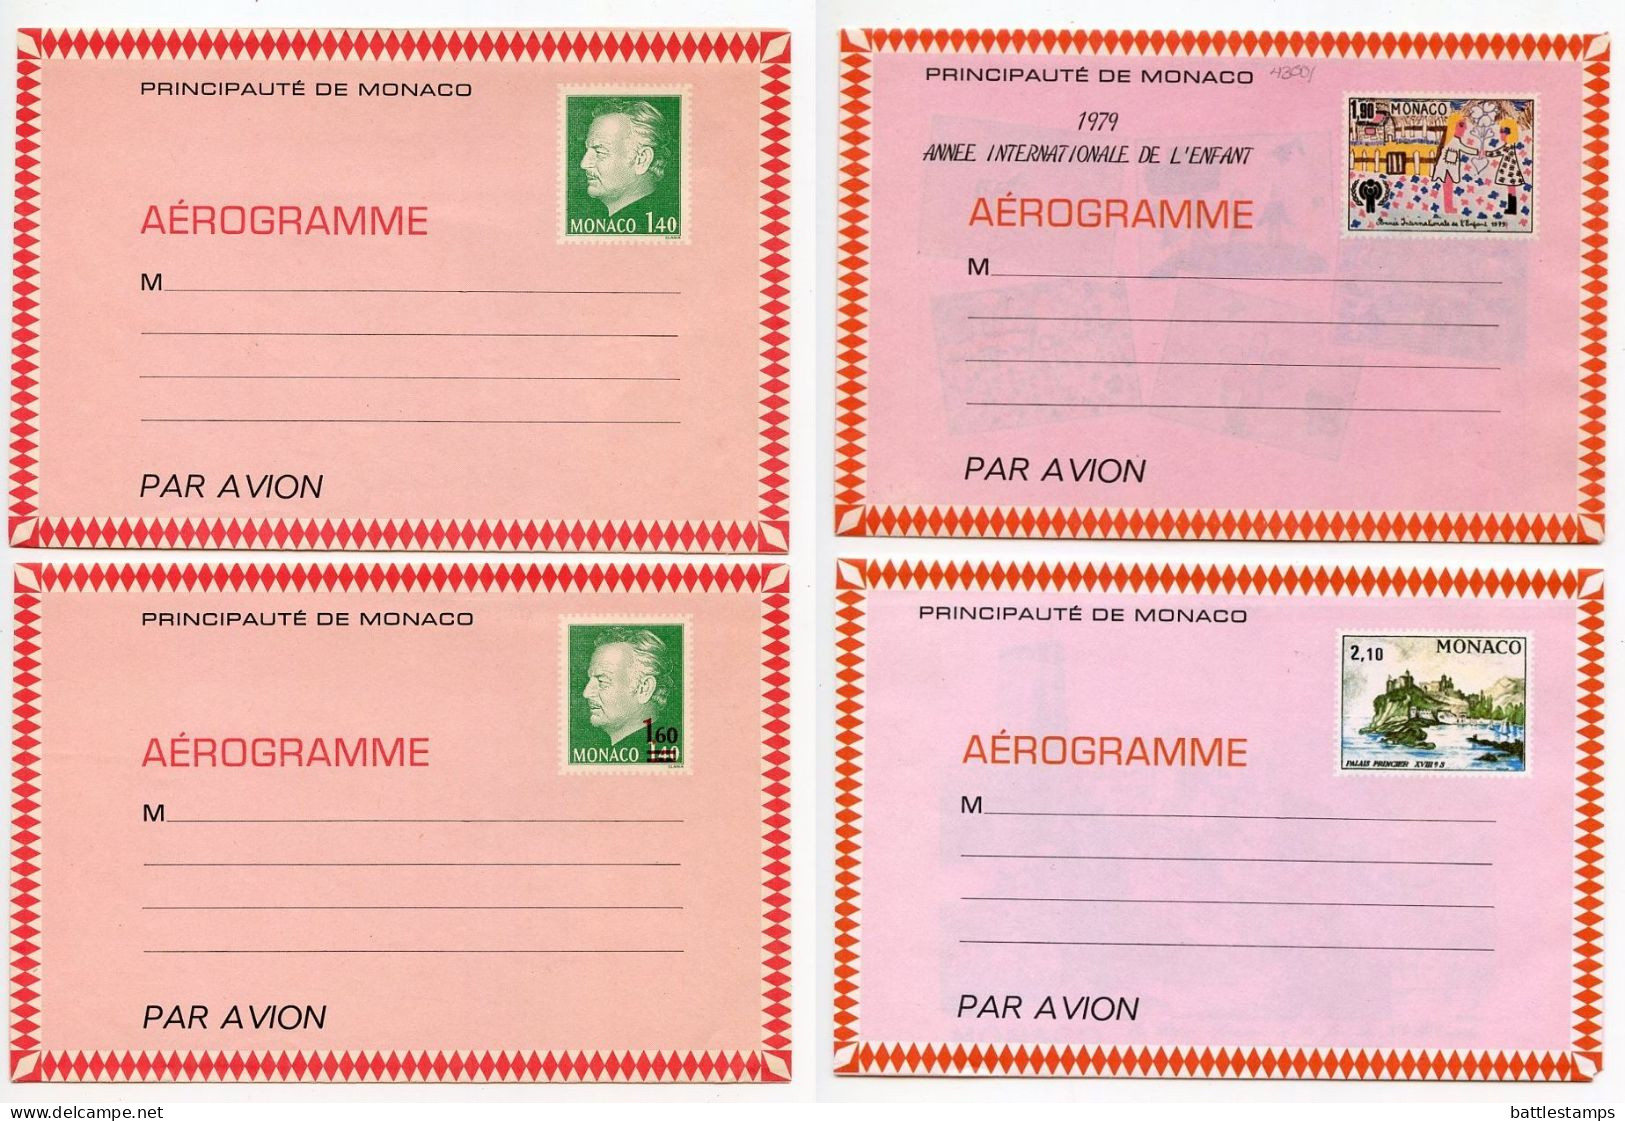 Monaco 1970's 4 Different Mint Aeogrammes - Prince Rainier III, Royal Place & International Year Of The Child - Ganzsachen